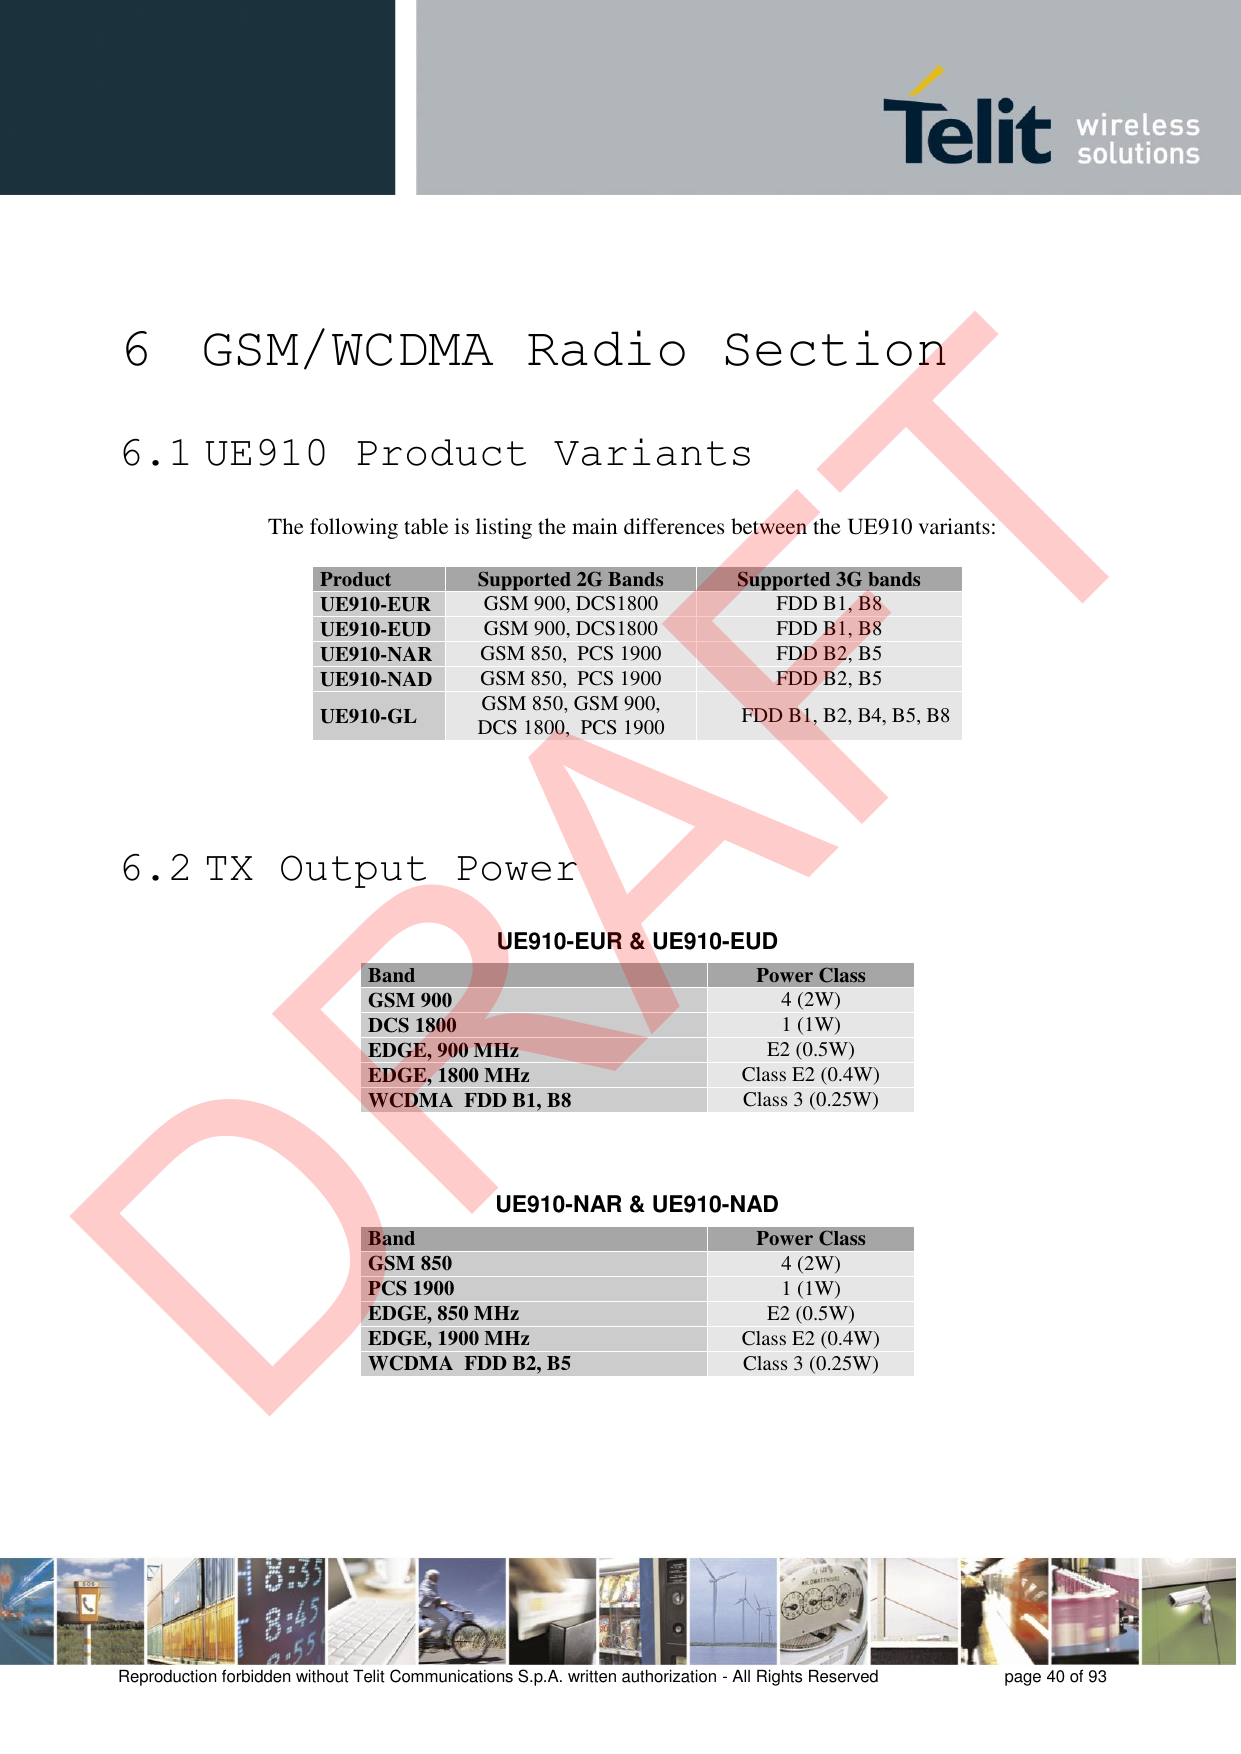 Reproduction forbidden without Telit Communications S.p.A. written authorization - All Rights Reserved  page 40 of 93 6 GSM/WCDMA Radio Section 6.1 UE910 Product Variants The following table is listing the main differences between the UE910 variants: Product Supported 2G Bands Supported 3G bands UE910-EUR GSM 900, DCS1800 FDD B1, B8 UE910-EUD GSM 900, DCS1800 FDD B1, B8 UE910-NAR GSM 850,  PCS 1900 FDD B2, B5 UE910-NAD GSM 850,  PCS 1900 FDD B2, B5 UE910-GL GSM 850, GSM 900,  DCS 1800,  PCS 1900 FDD B1, B2, B4, B5, B8 6.2 TX Output Power UE910-EUR &amp; UE910-EUD UE910-NAR &amp; UE910-NAD Band Power Class GSM 900 4 (2W) DCS 1800 1 (1W) EDGE, 900 MHz E2 (0.5W) EDGE, 1800 MHz Class E2 (0.4W) WCDMA  FDD B1, B8 Class 3 (0.25W) Band Power Class GSM 850 4 (2W) PCS 1900 1 (1W) EDGE, 850 MHz E2 (0.5W) EDGE, 1900 MHz Class E2 (0.4W) WCDMA  FDD B2, B5 Class 3 (0.25W) DRAFT